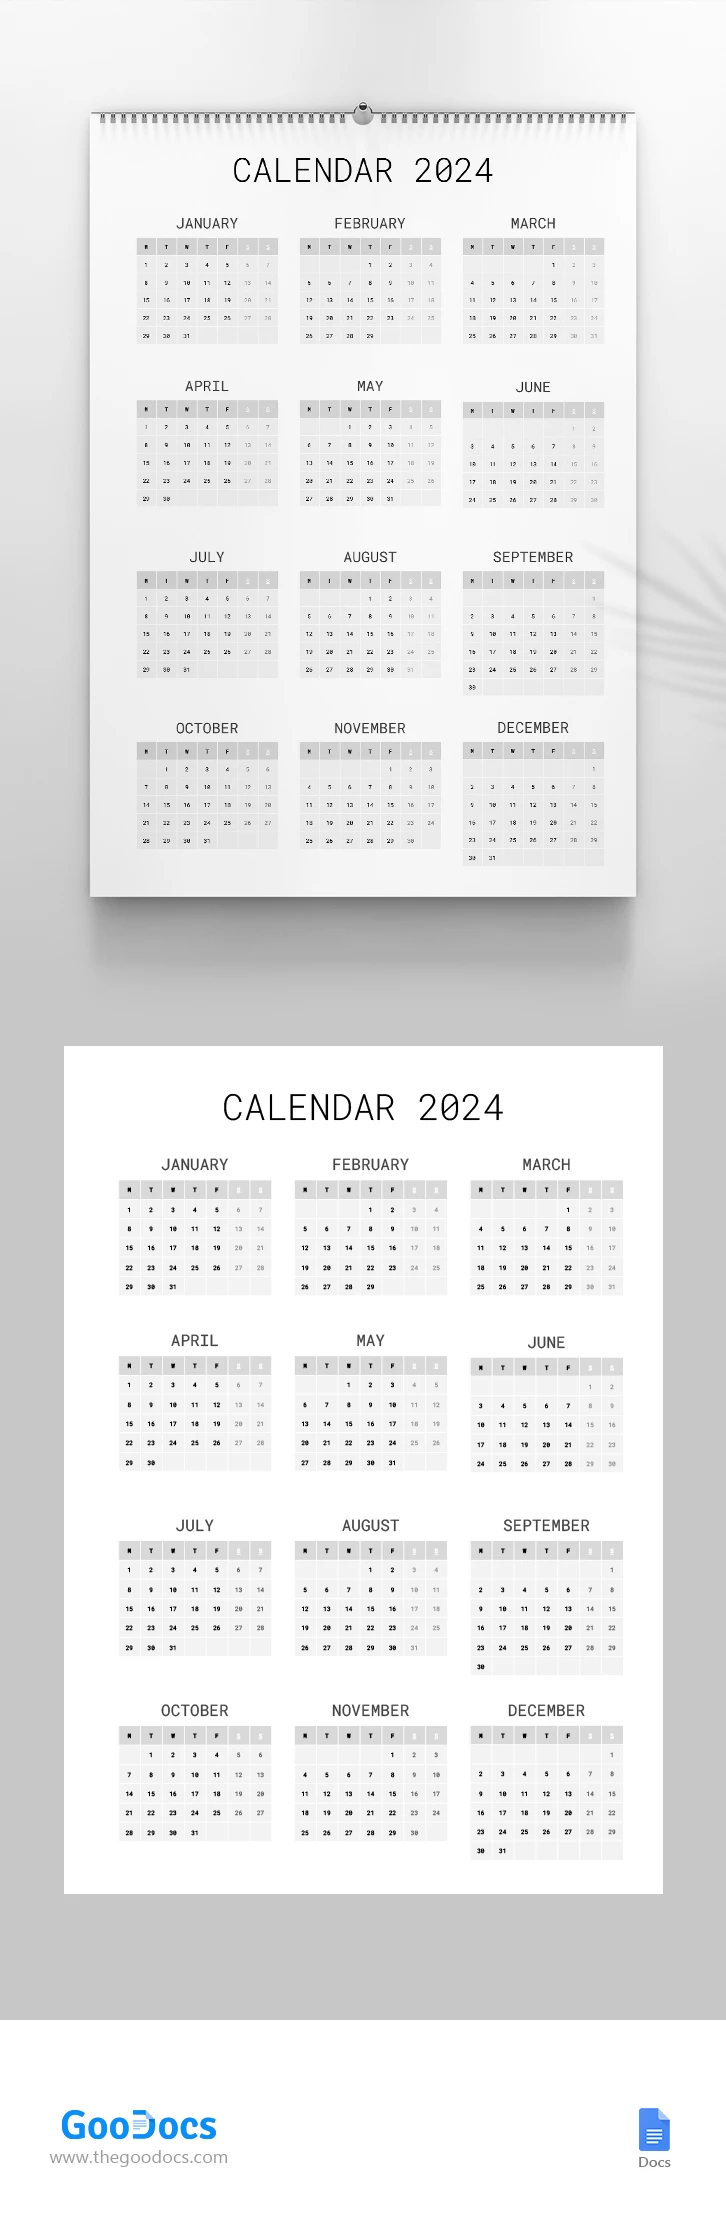 Calendrier annuel 2024 - free Google Docs Template - 10068199